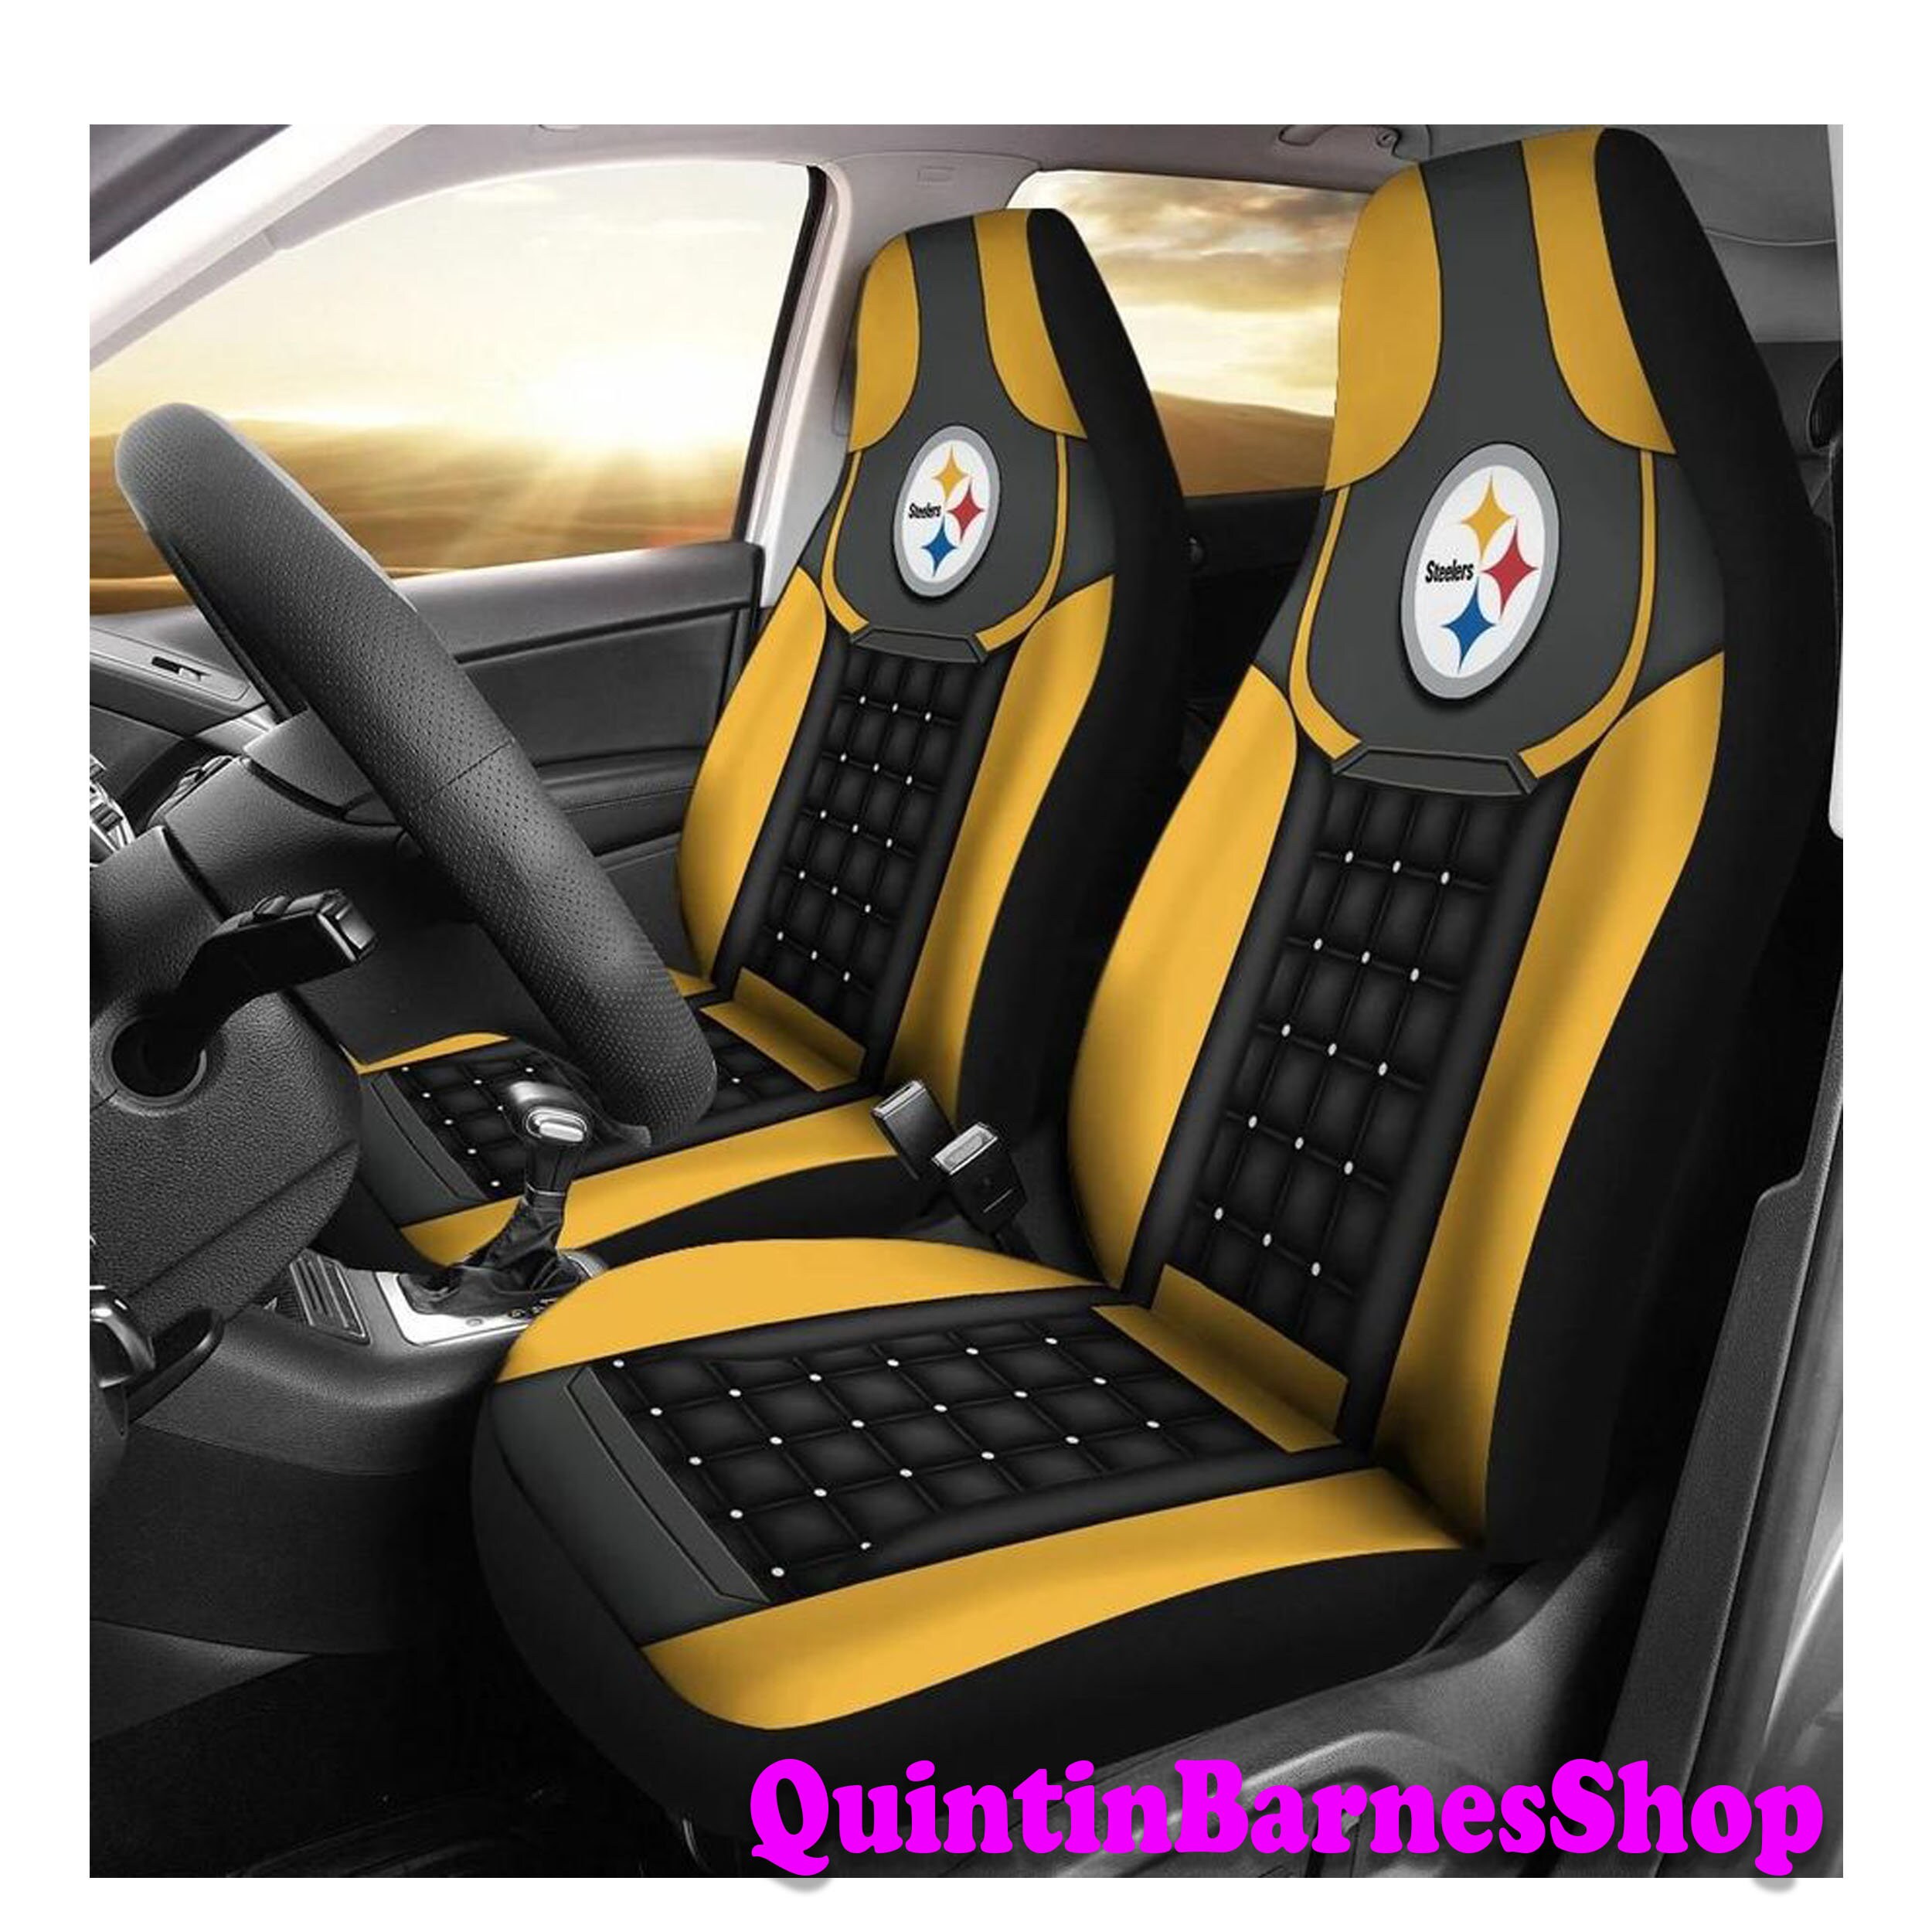 Pittsburgh Steelers Car Seat Covers NFL Car Seat cover Gifts | Etsy